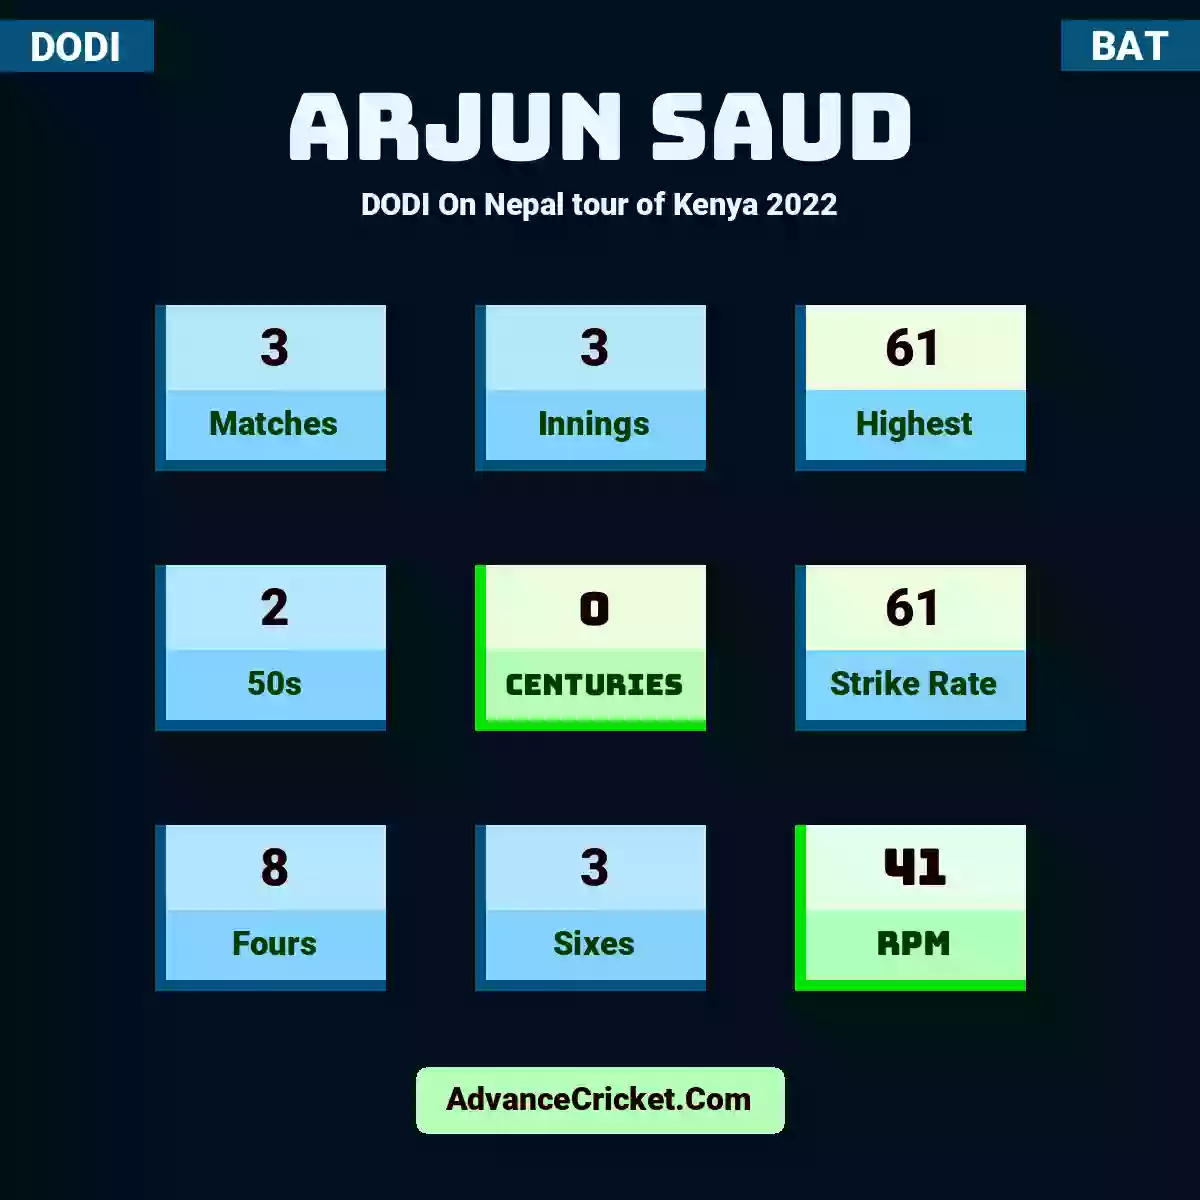 Arjun Saud DODI  On Nepal tour of Kenya 2022, Arjun Saud played 3 matches, scored 61 runs as highest, 2 half-centuries, and 0 centuries, with a strike rate of 61. A.Saud hit 8 fours and 3 sixes, with an RPM of 41.